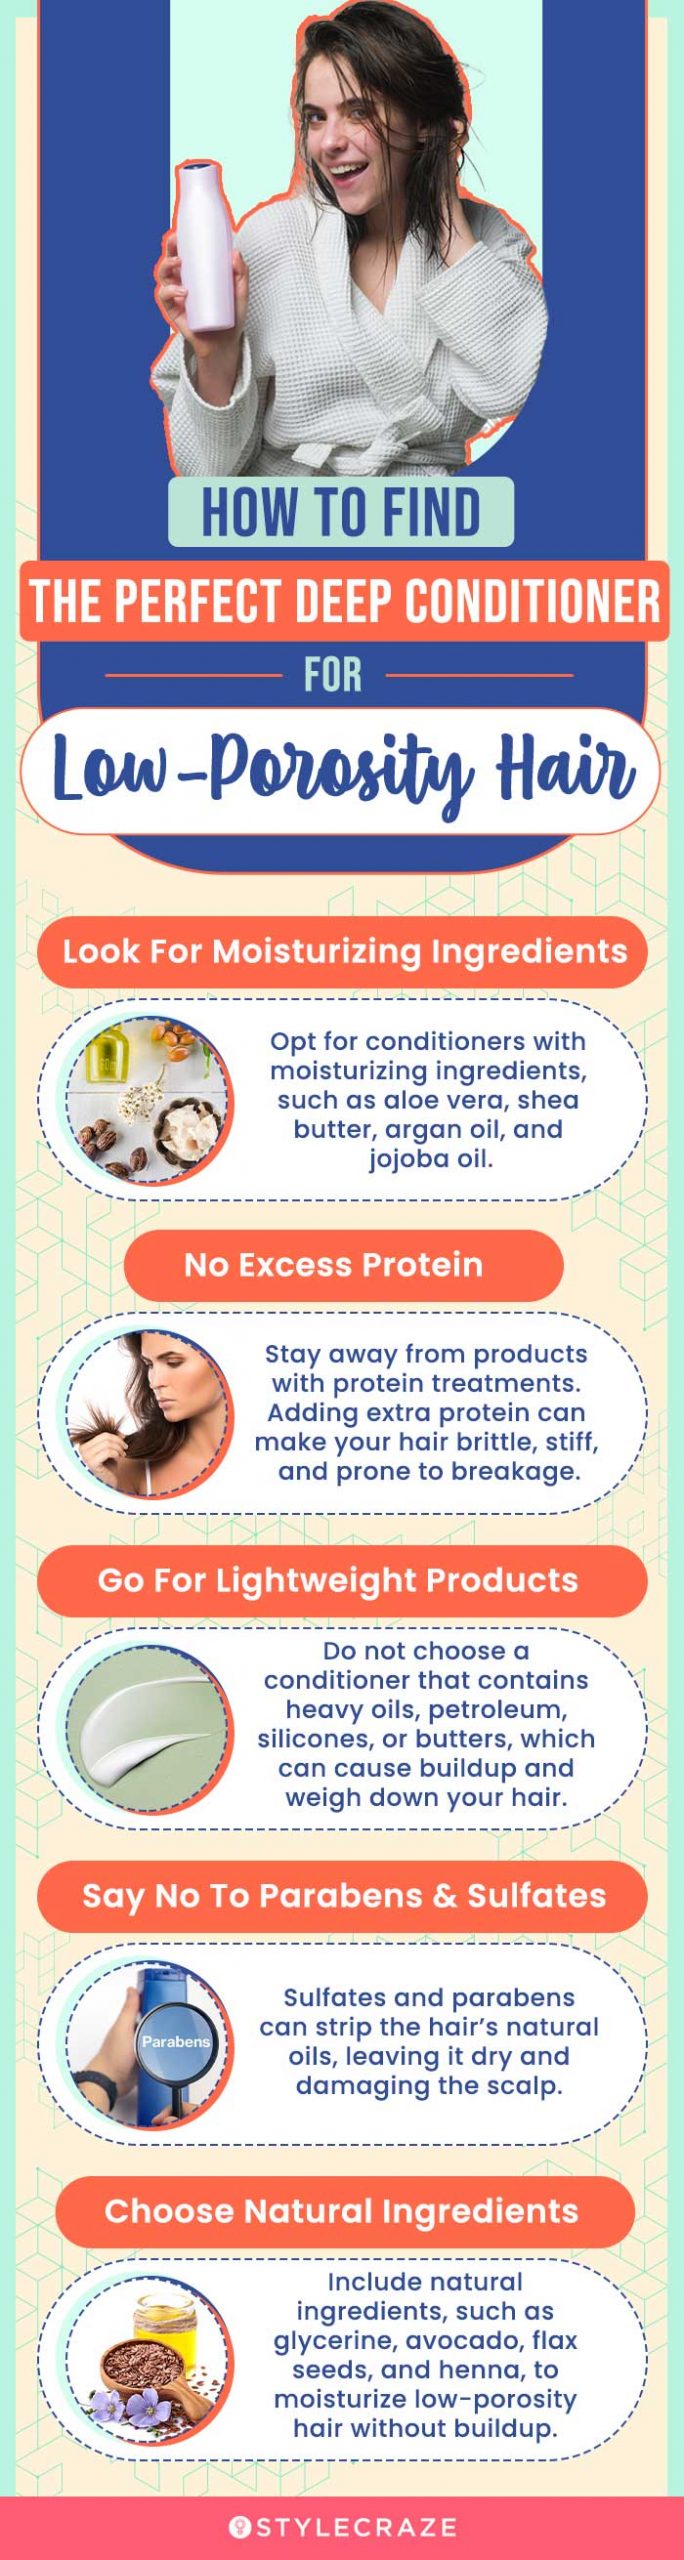 How To Find The Perfect Deep Conditioner Low-Porosity Hair (infographic)